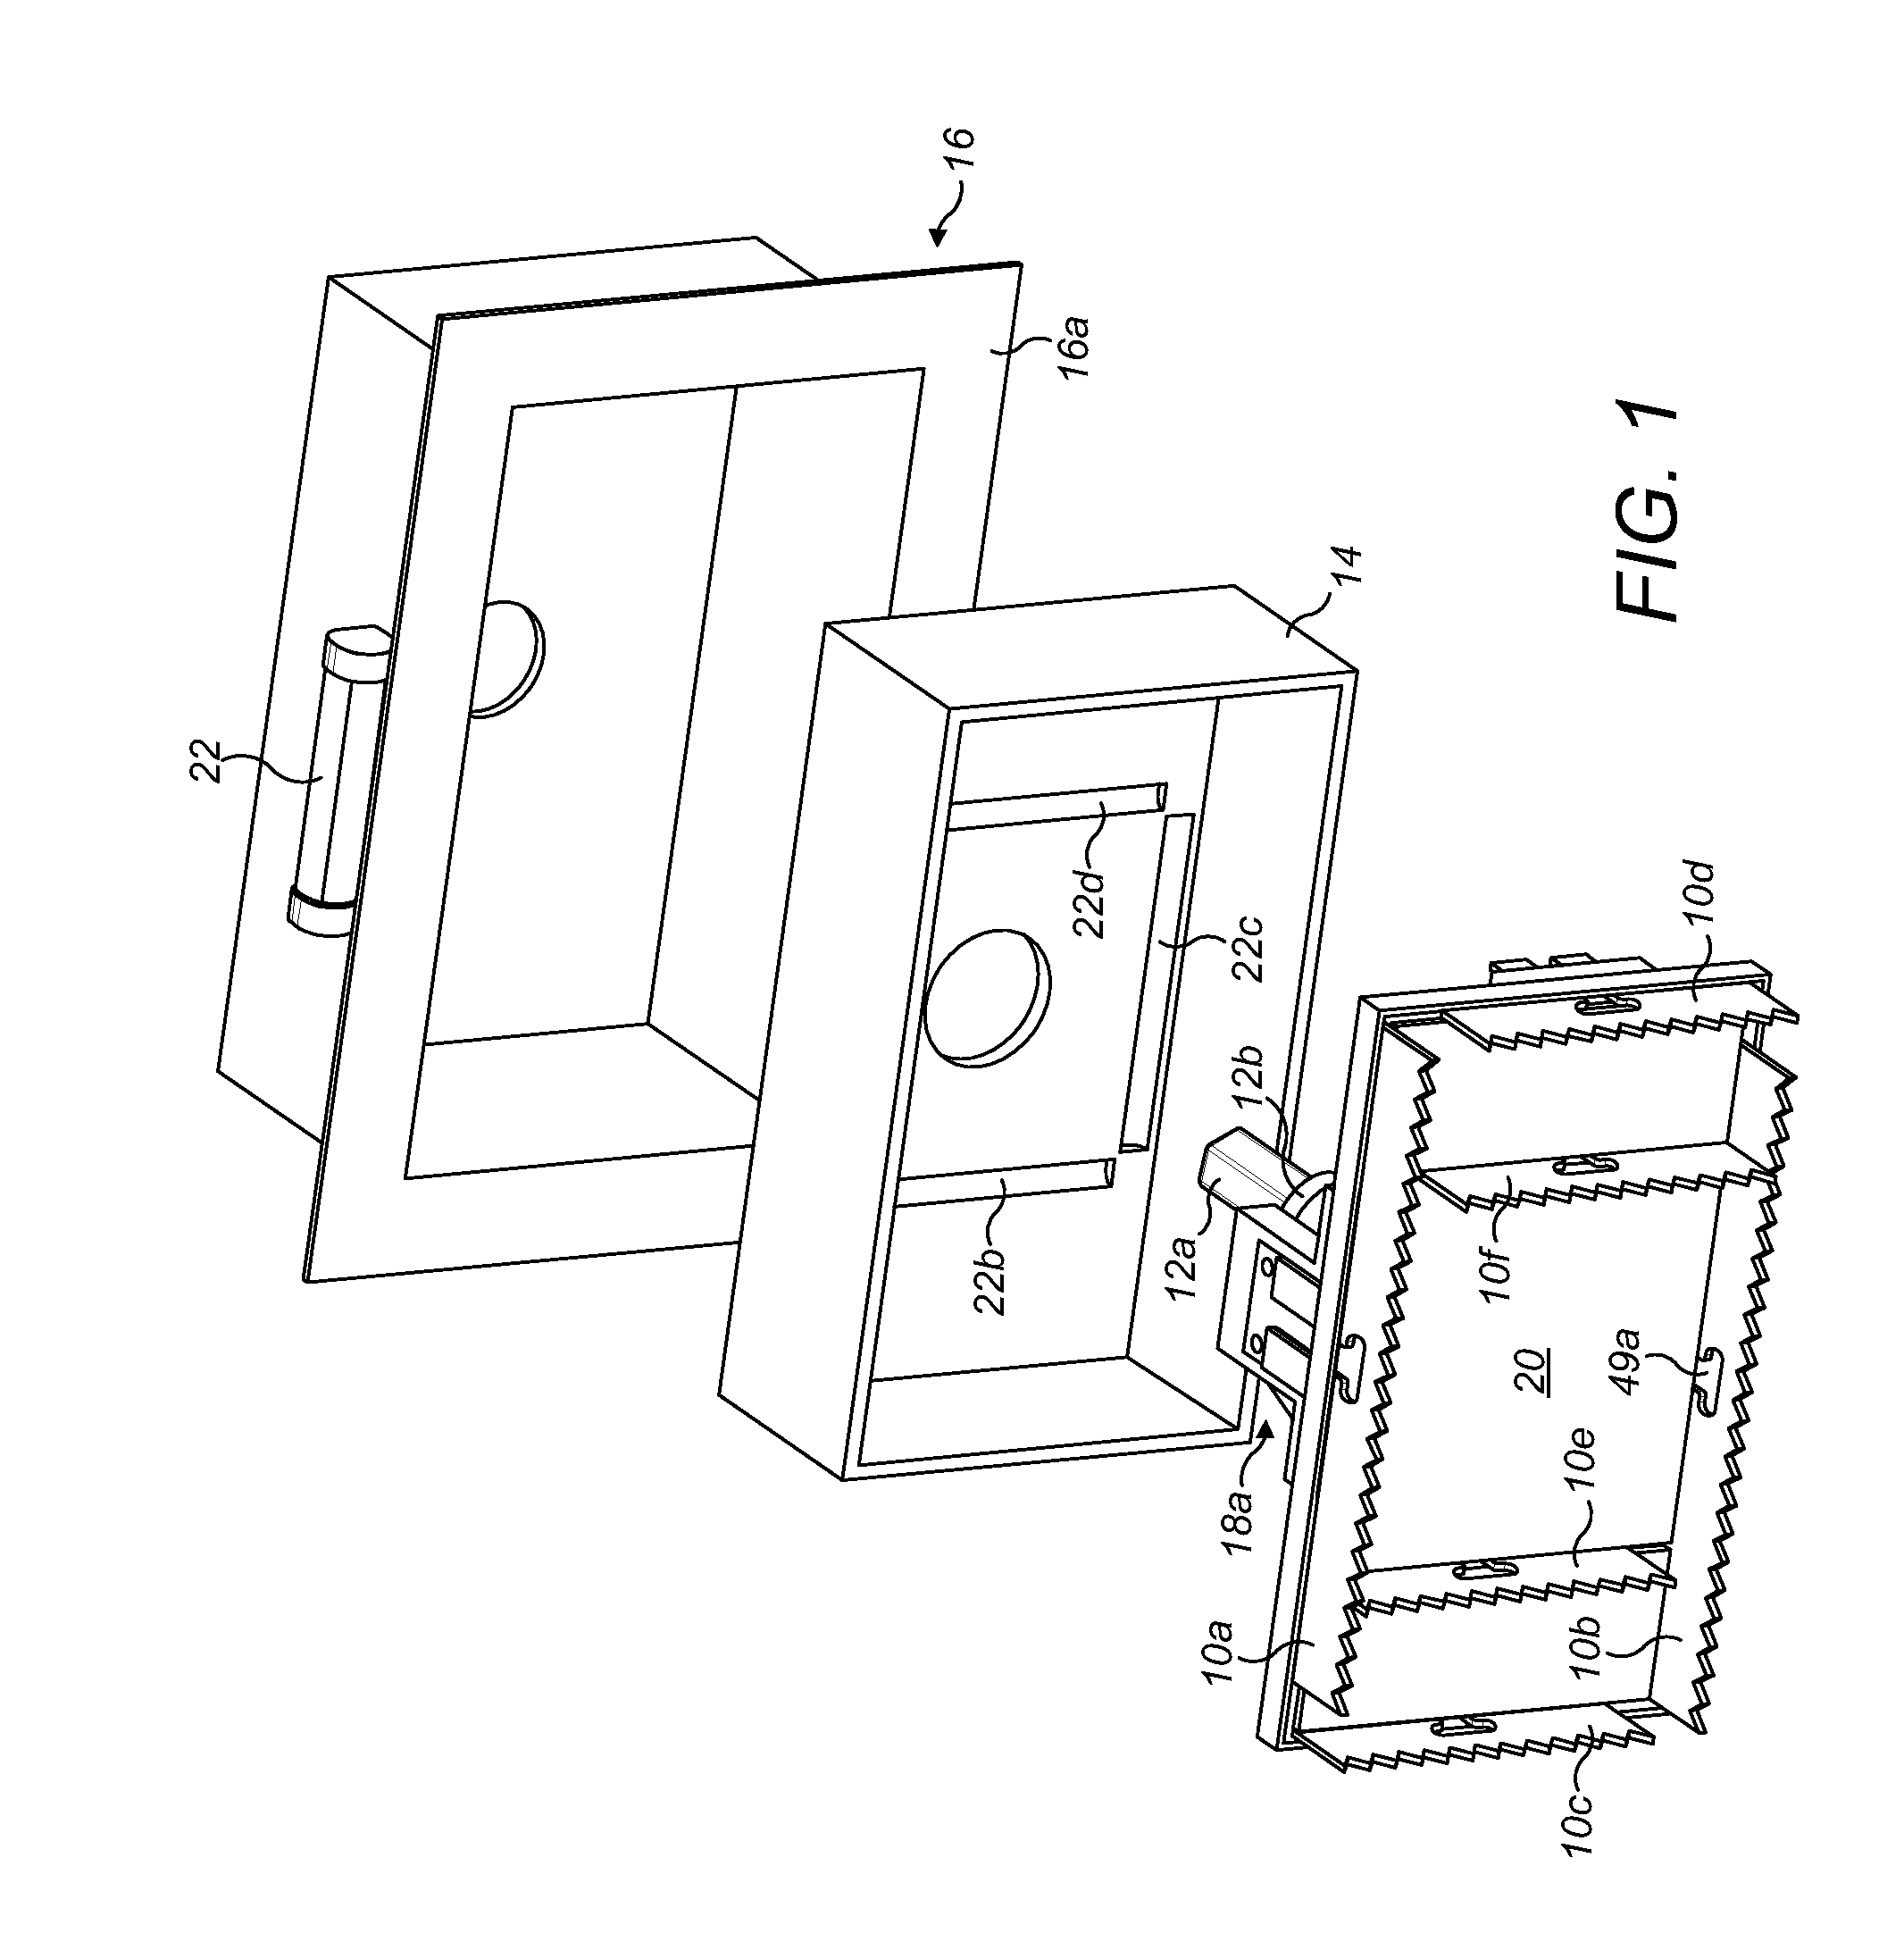 Converting between rotary and linear motion, and a sawing device